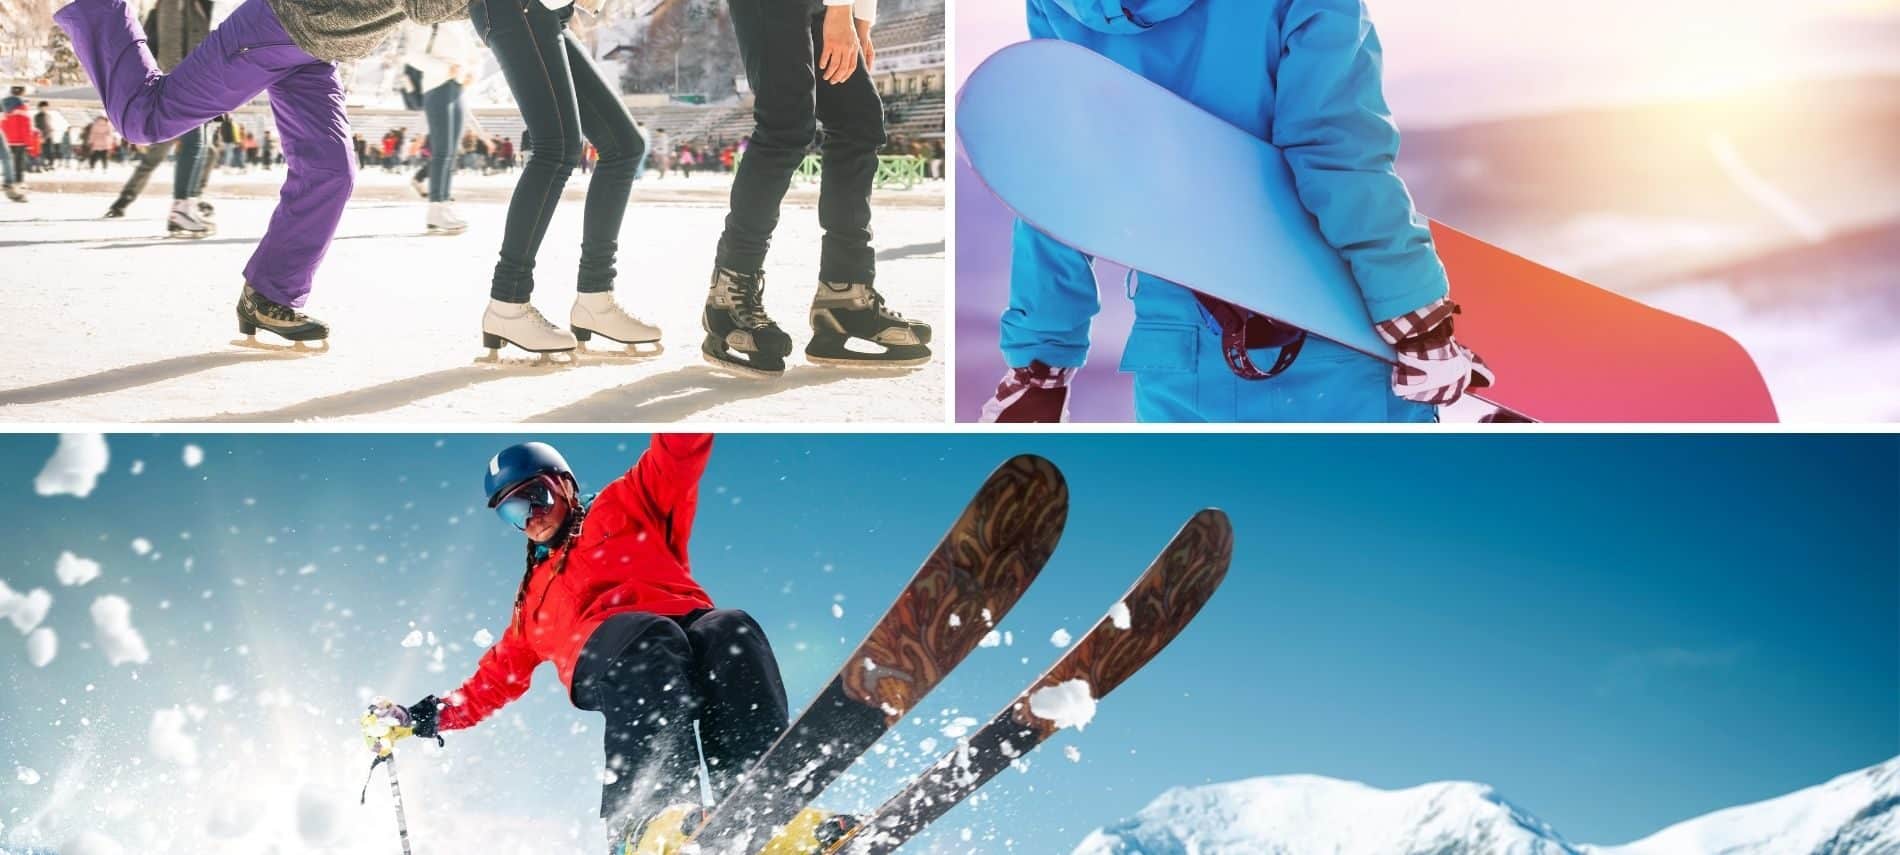 Grid of winter activities showing ice skating, skiing and snowboarding